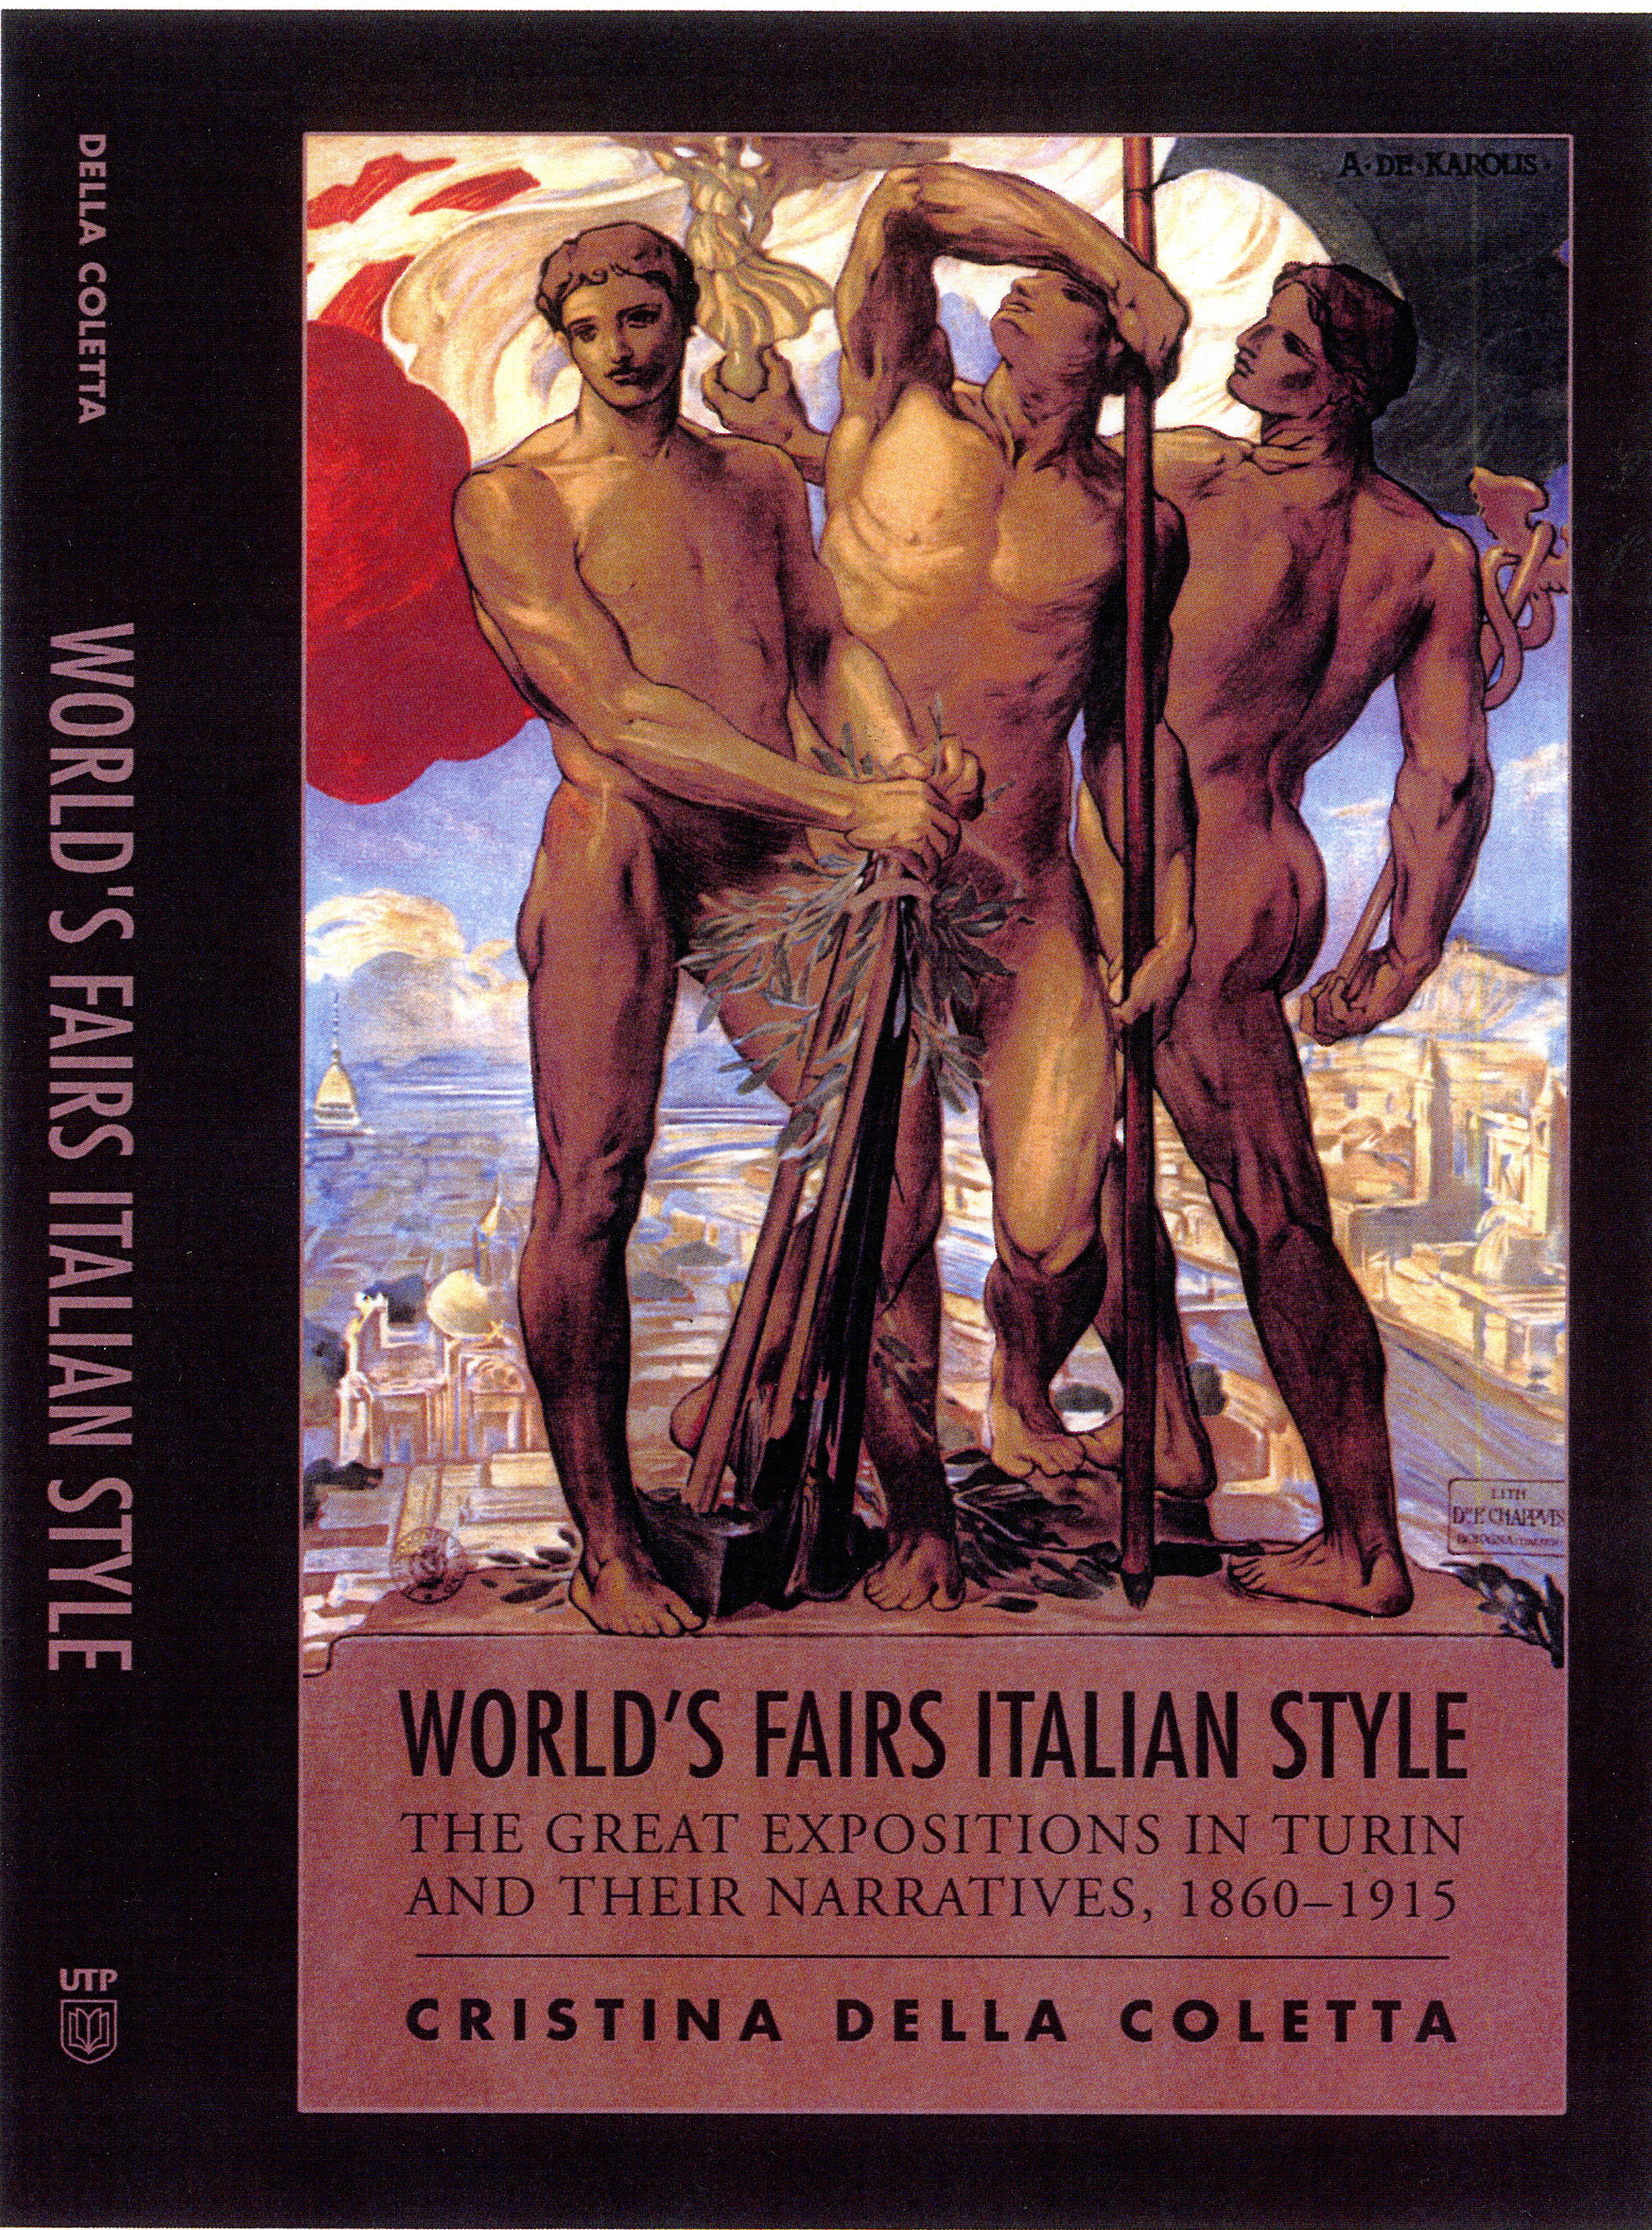 Text reads: World's fairs italian style.  The Great expositions in turin and their narratives, 1860-1915 by Cristina Della Coletta